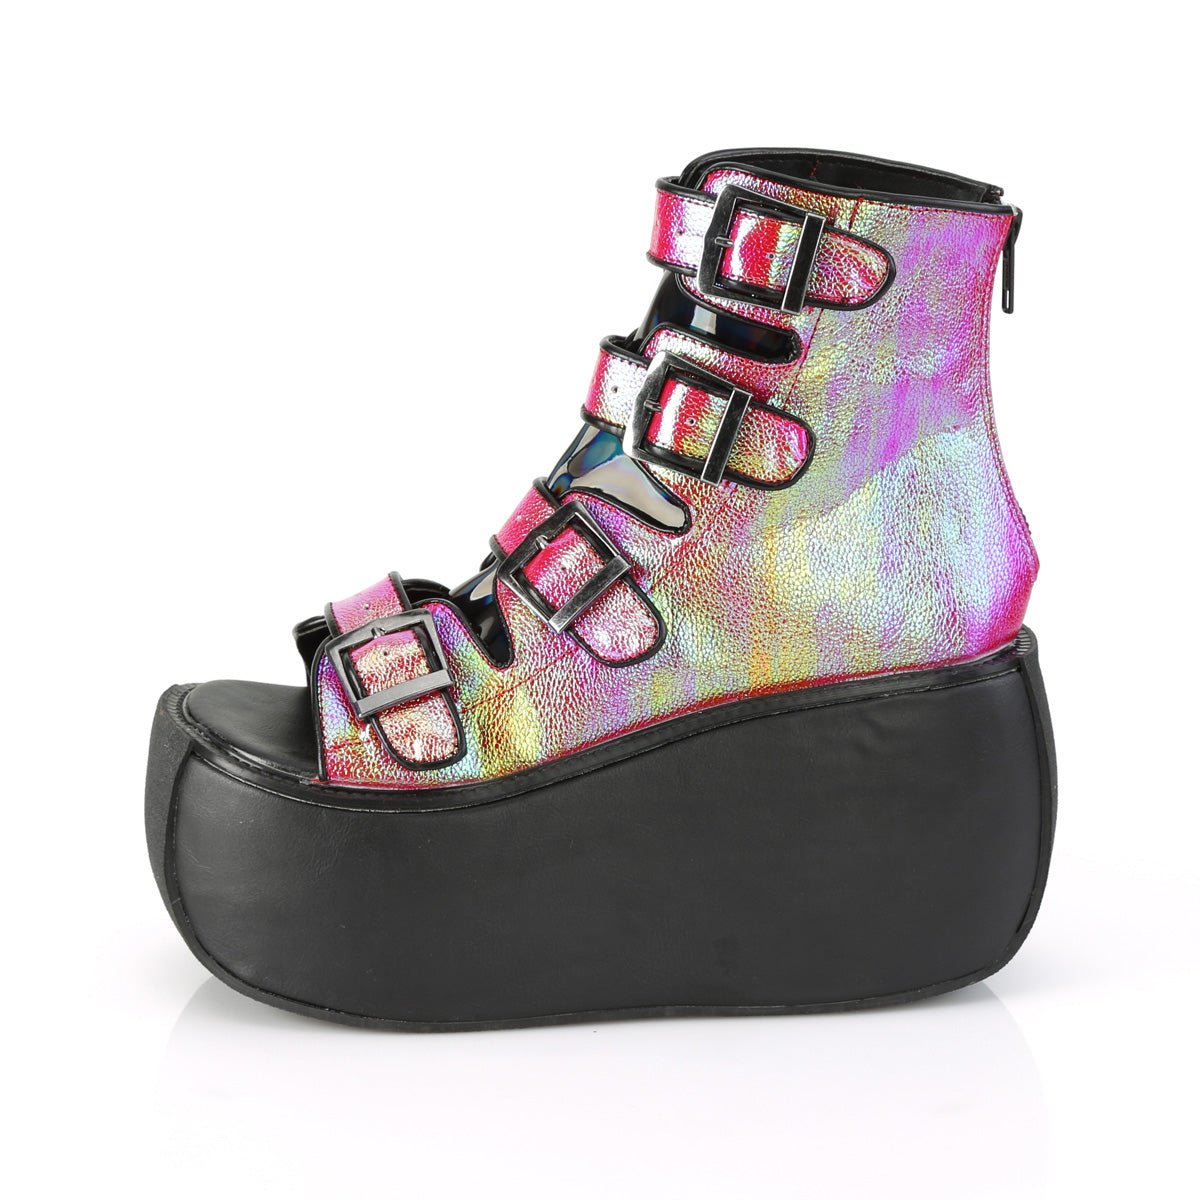 Too Fast | Demonia Violet 150 | Pink & Green Iridescent Vegan Leather Women's Ankle Boots